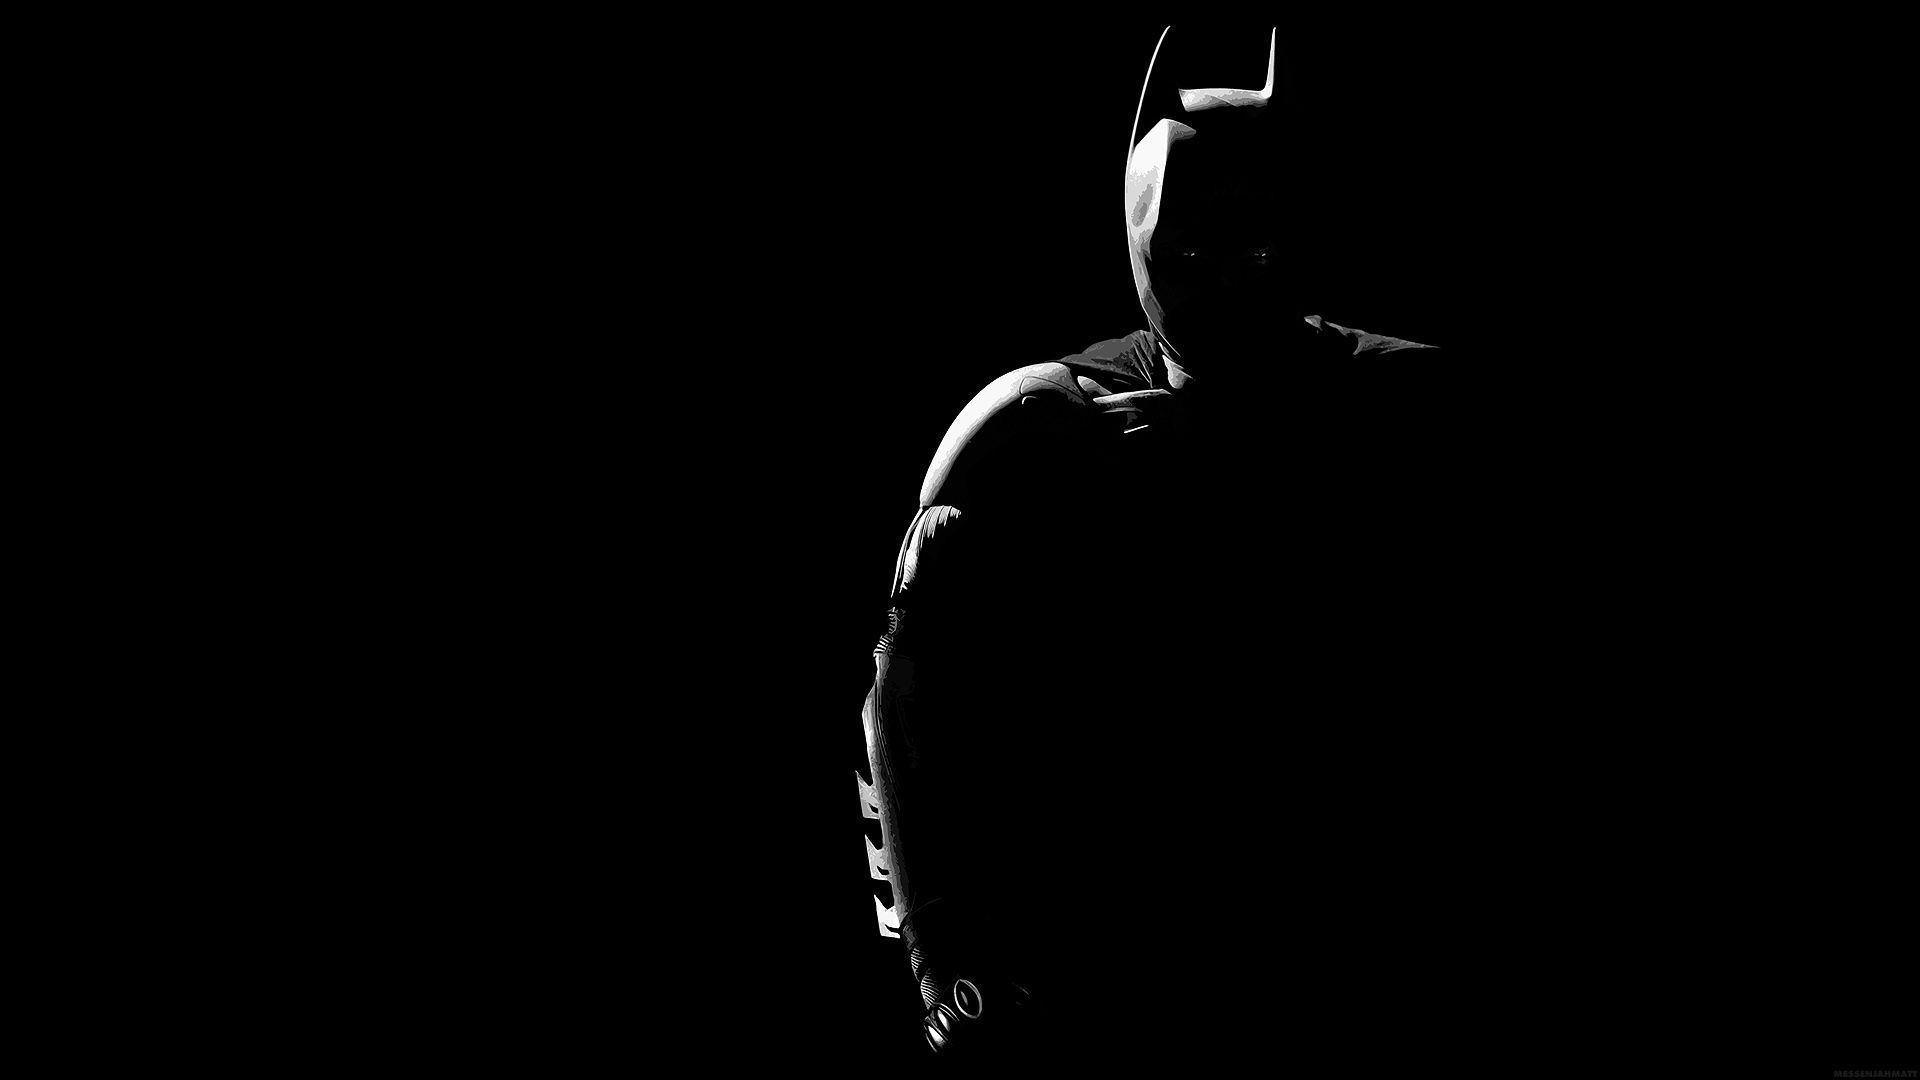 Download The Dark Knight Wallpaper FHD 1080p Desktop Backgrounds For PC Mac  Images Wallpaper 